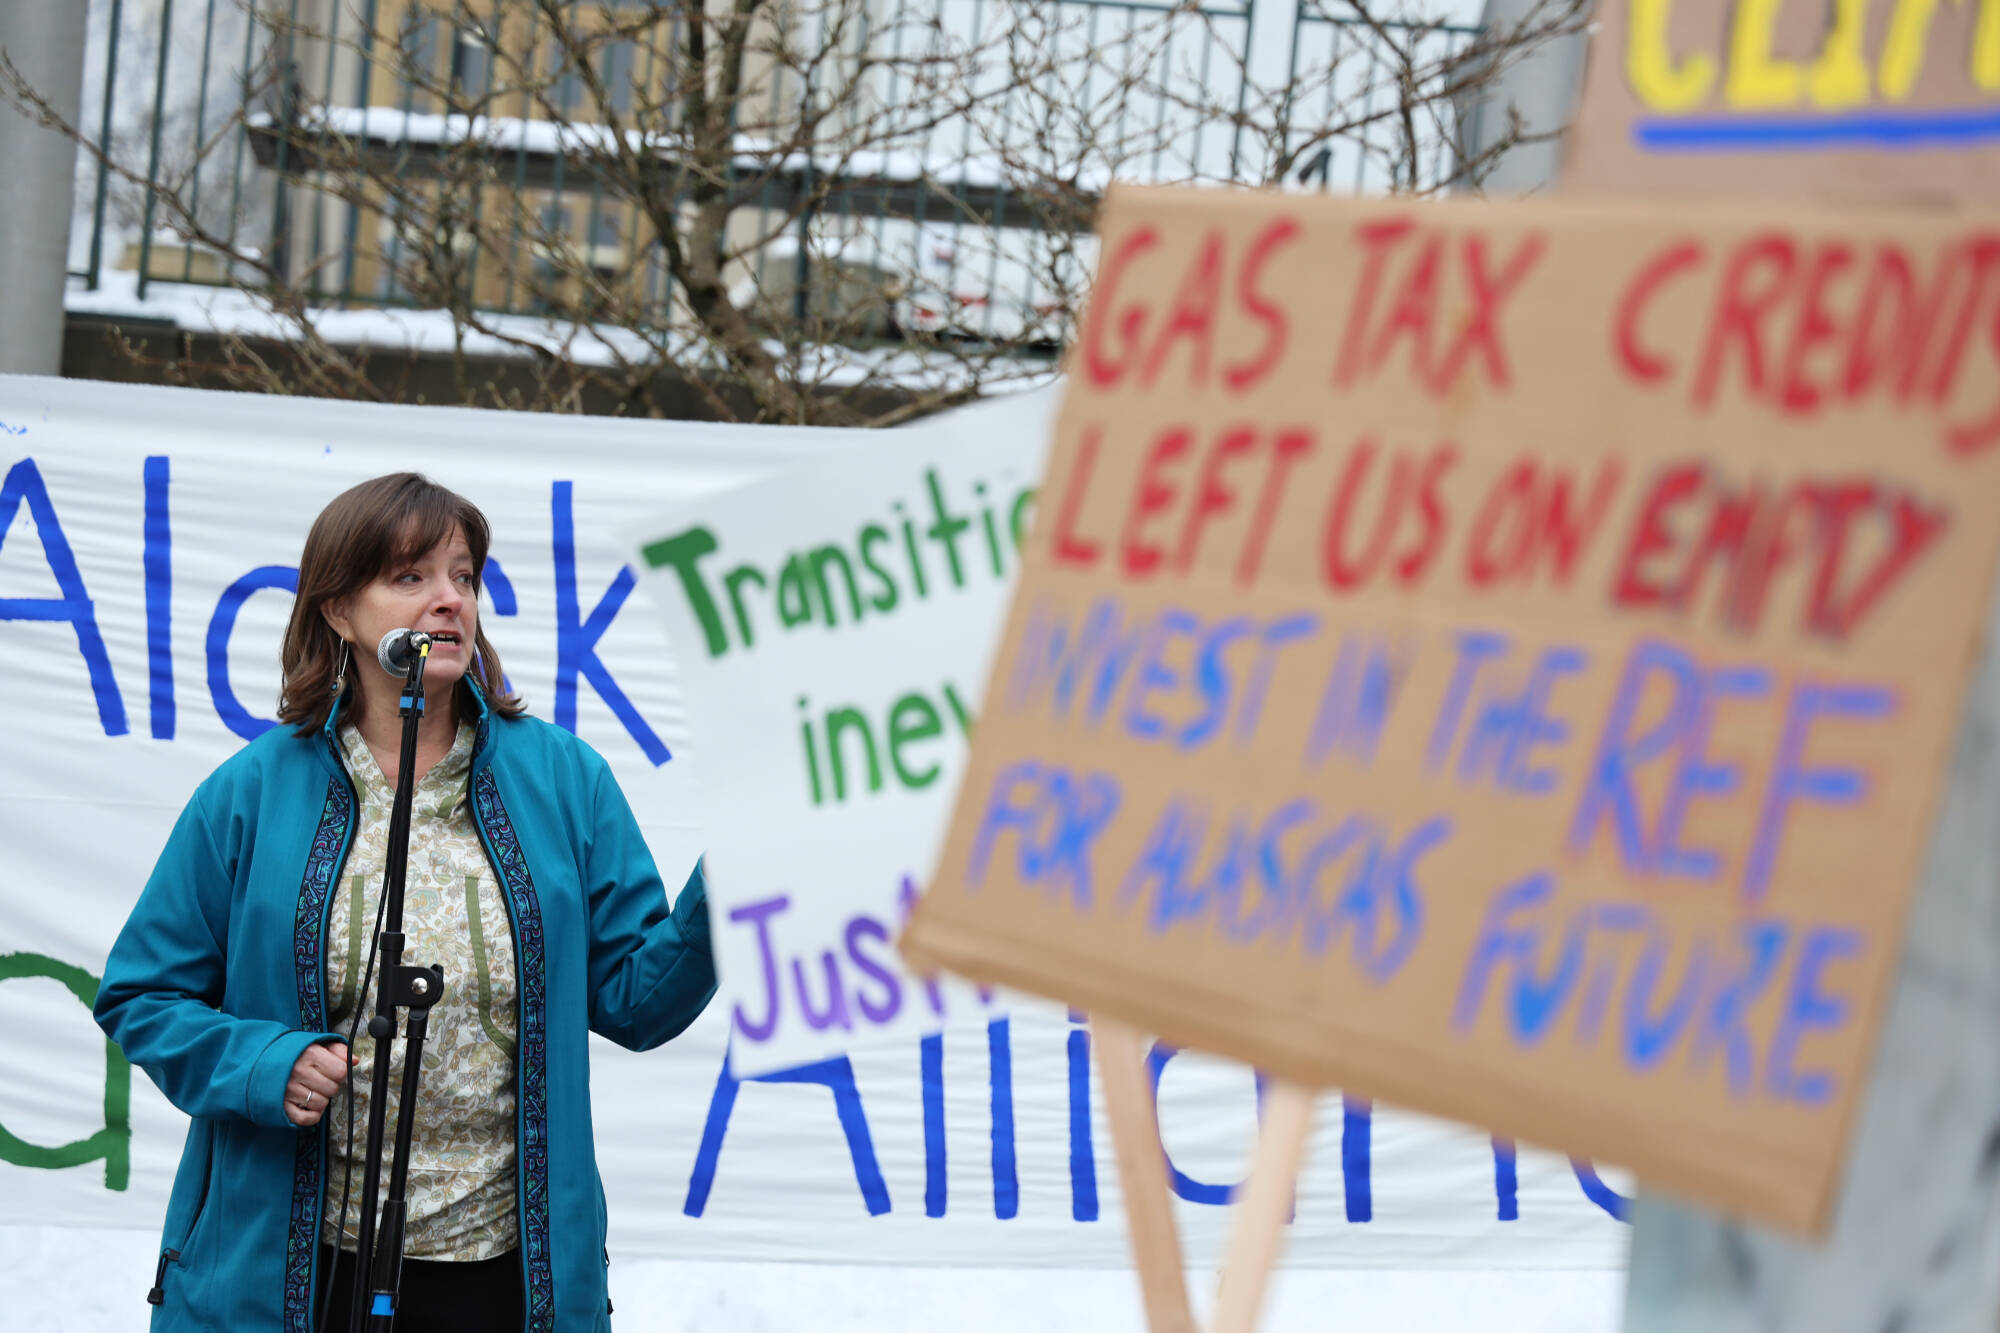 Independent Rep. Alyse Galvin of Anchorage speaks to a crowd of climate activists who held a rally outside the Alaska State Capitol on Friday, Feb. 3, 2023, to advocate for legislative action to improve Alaska’s renewable energy development and future sustainability. (Clarise Larson / Juneau Empire)